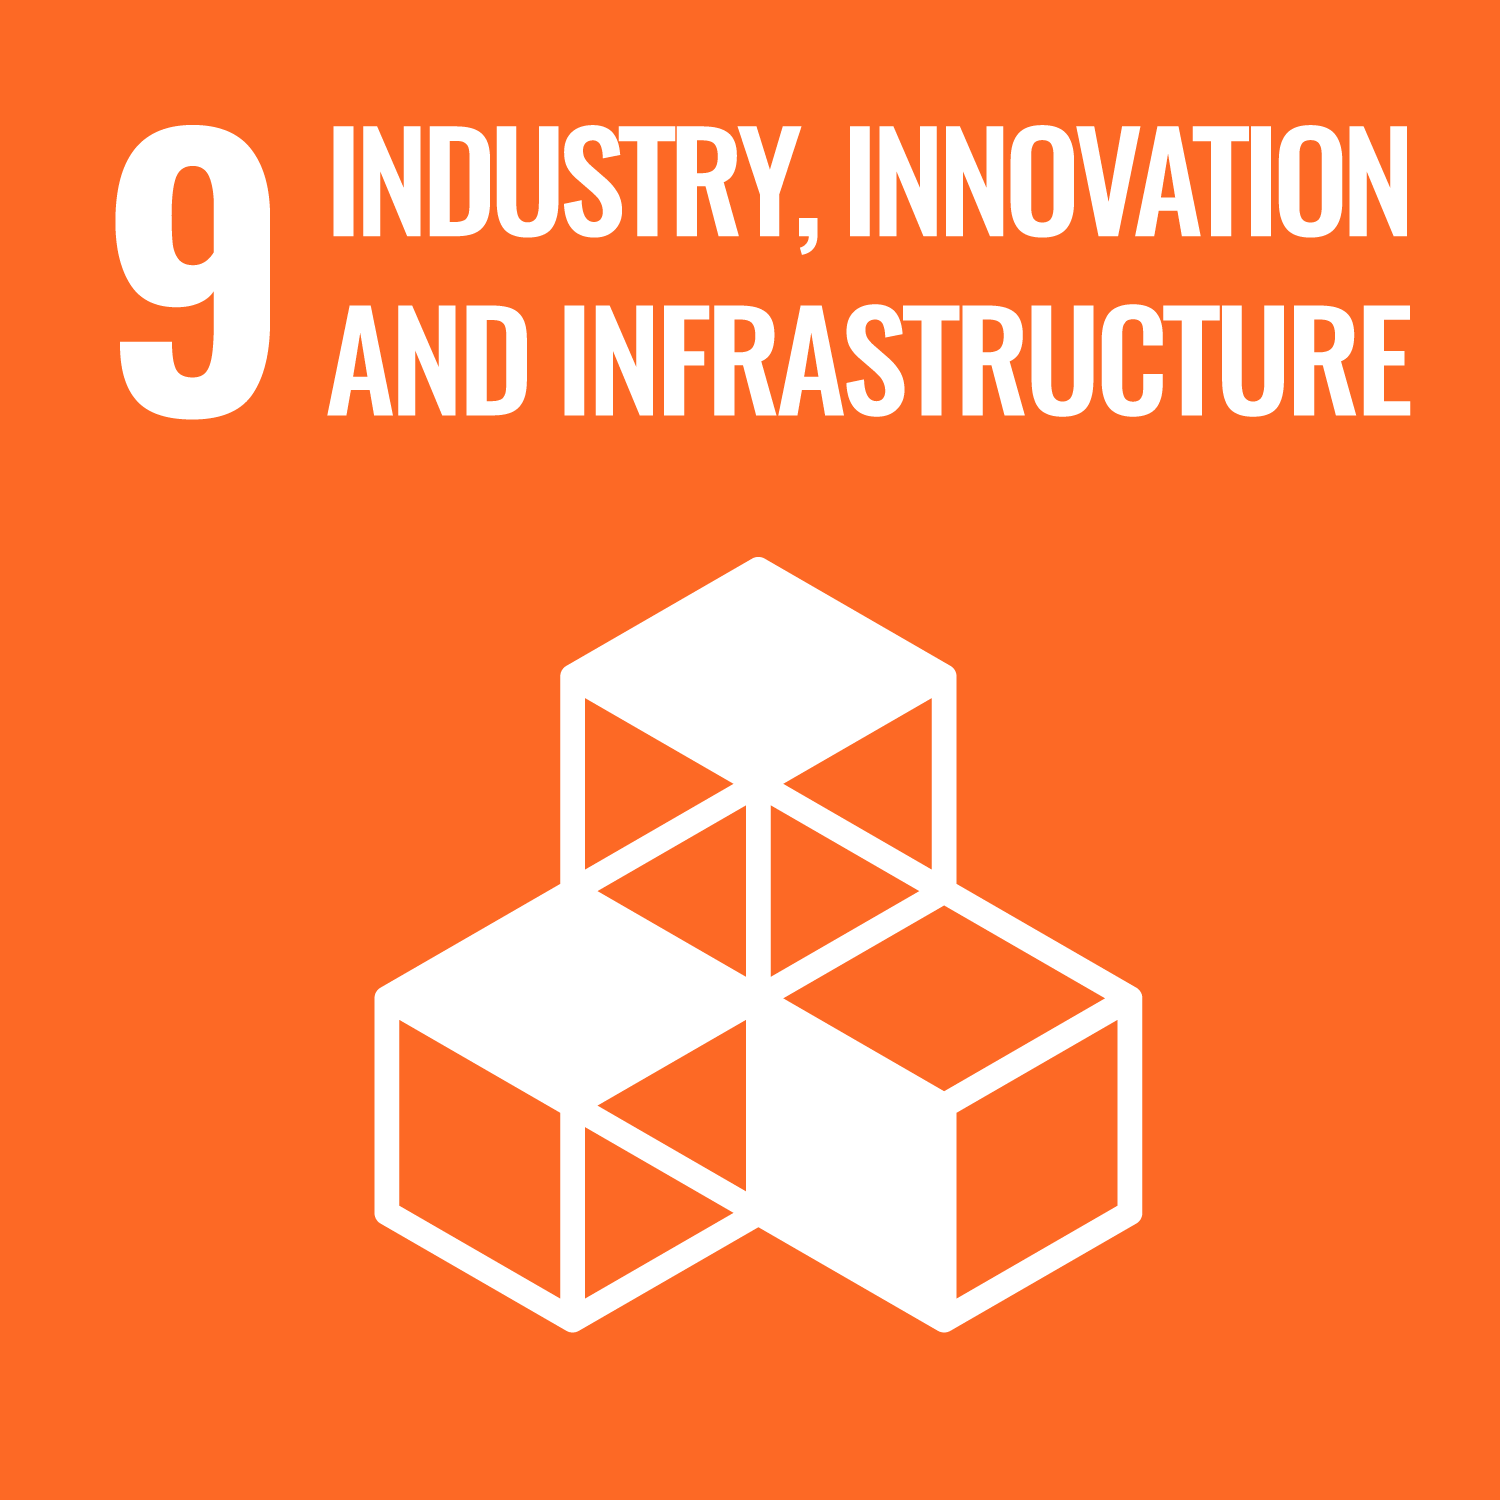 UNSDG-9 - Industry, Innovation and Infrastructure